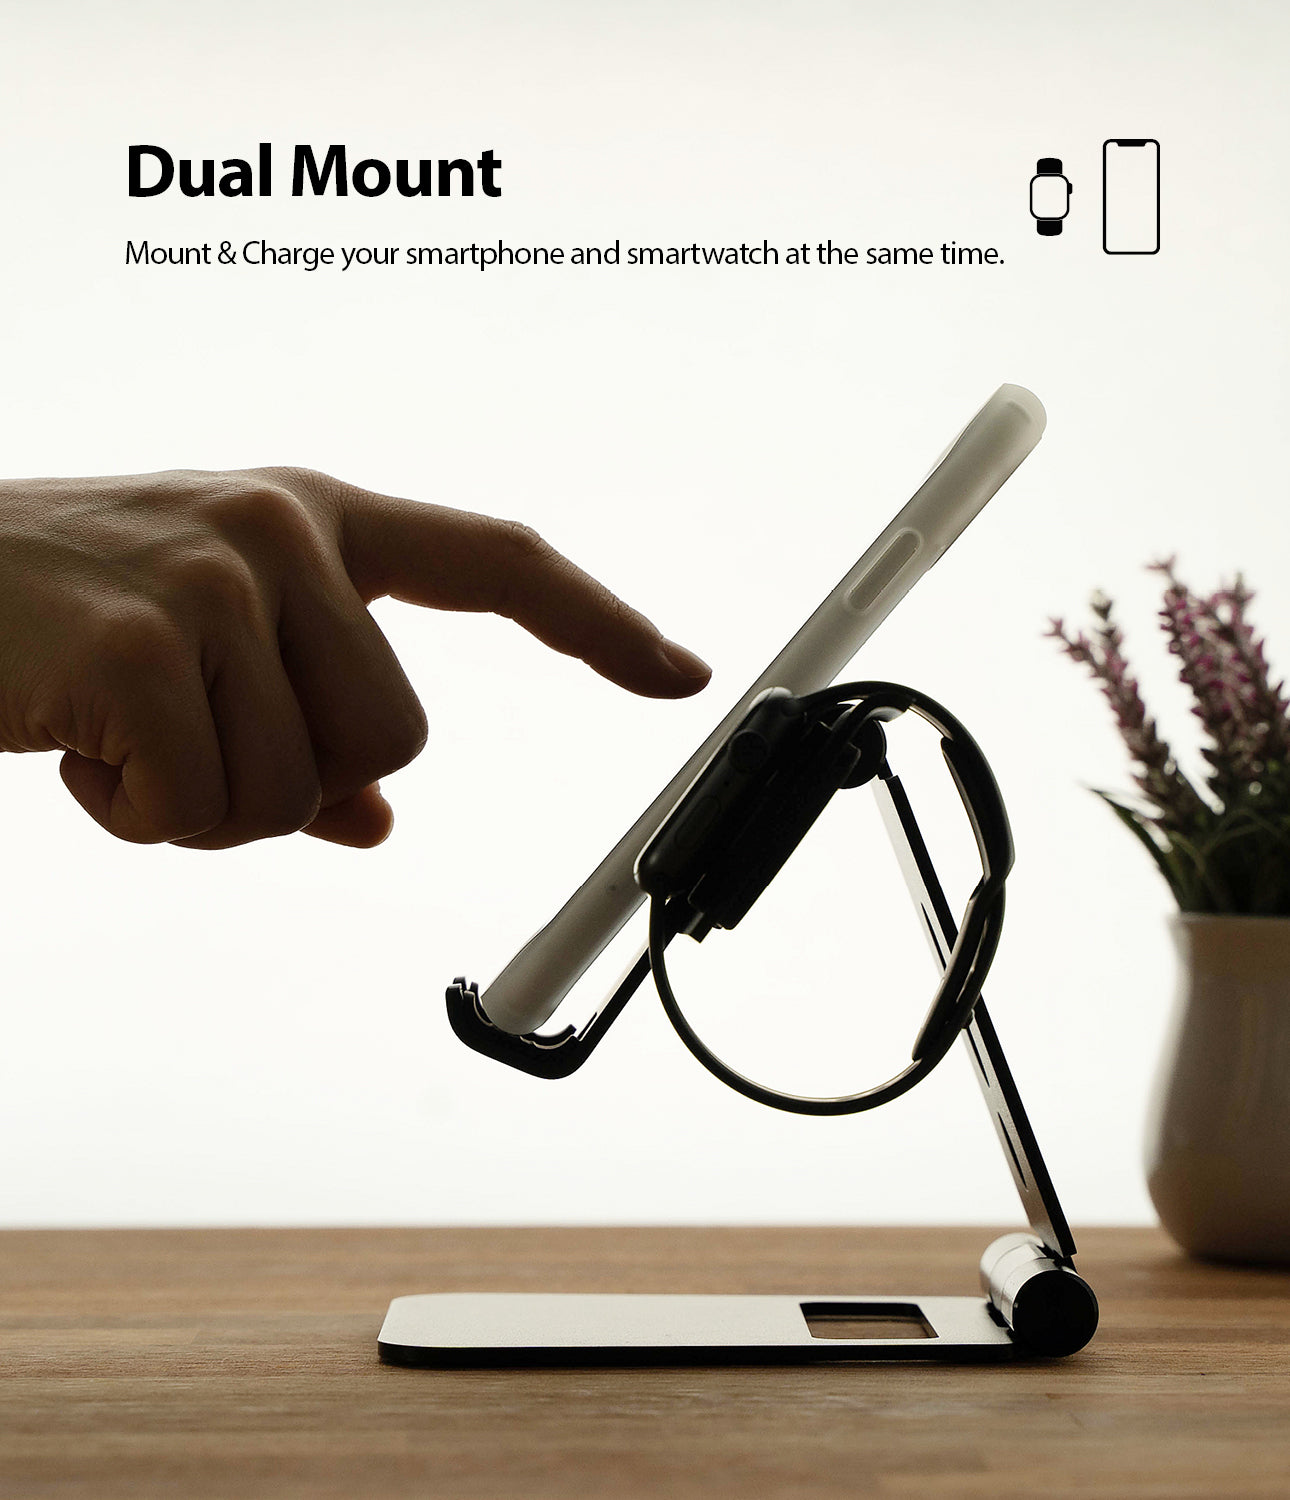 dual mount - mount your phone and smart watch together